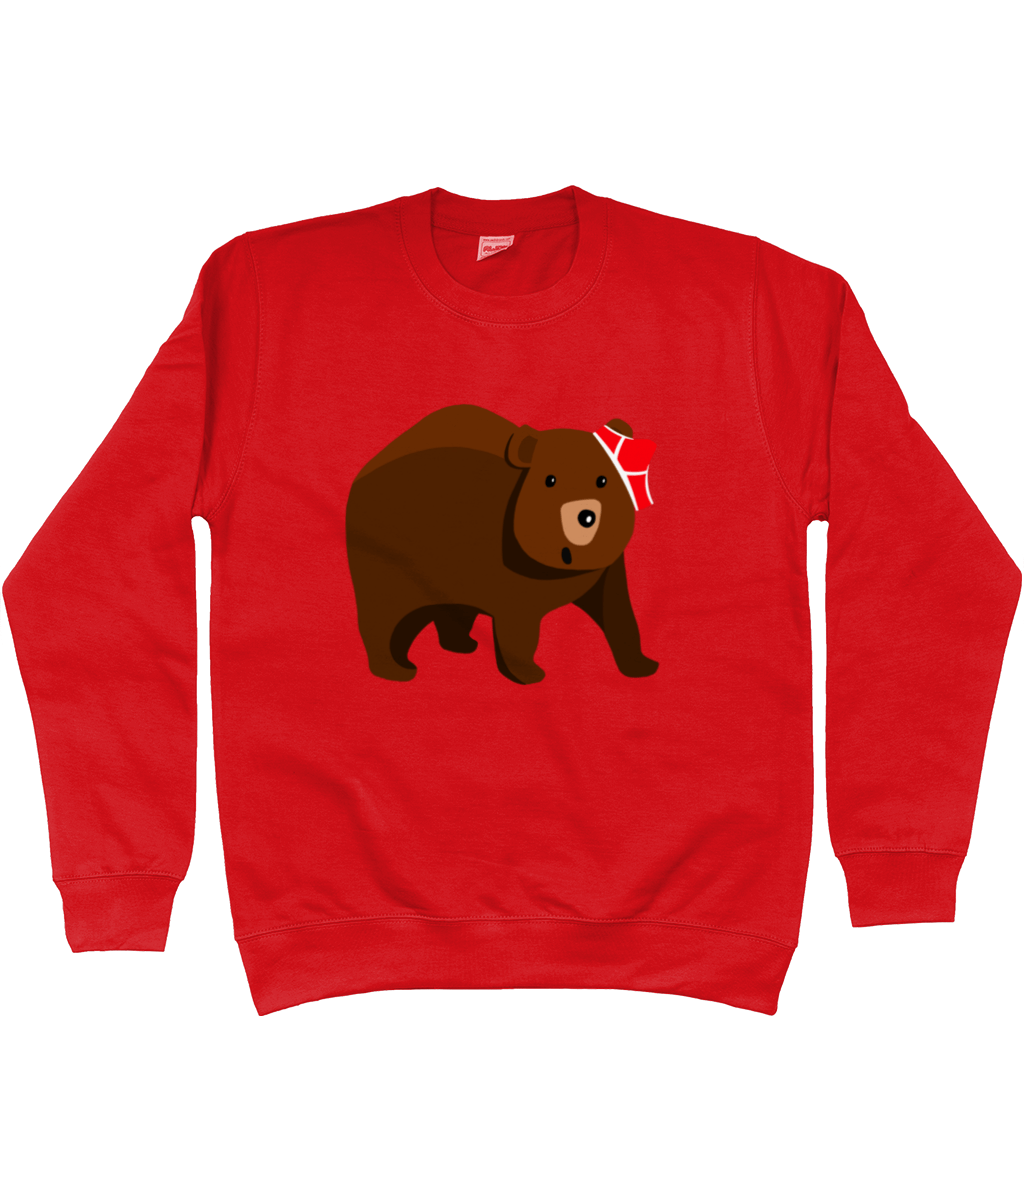 Big brown bear with red pants on his head on a red sweater